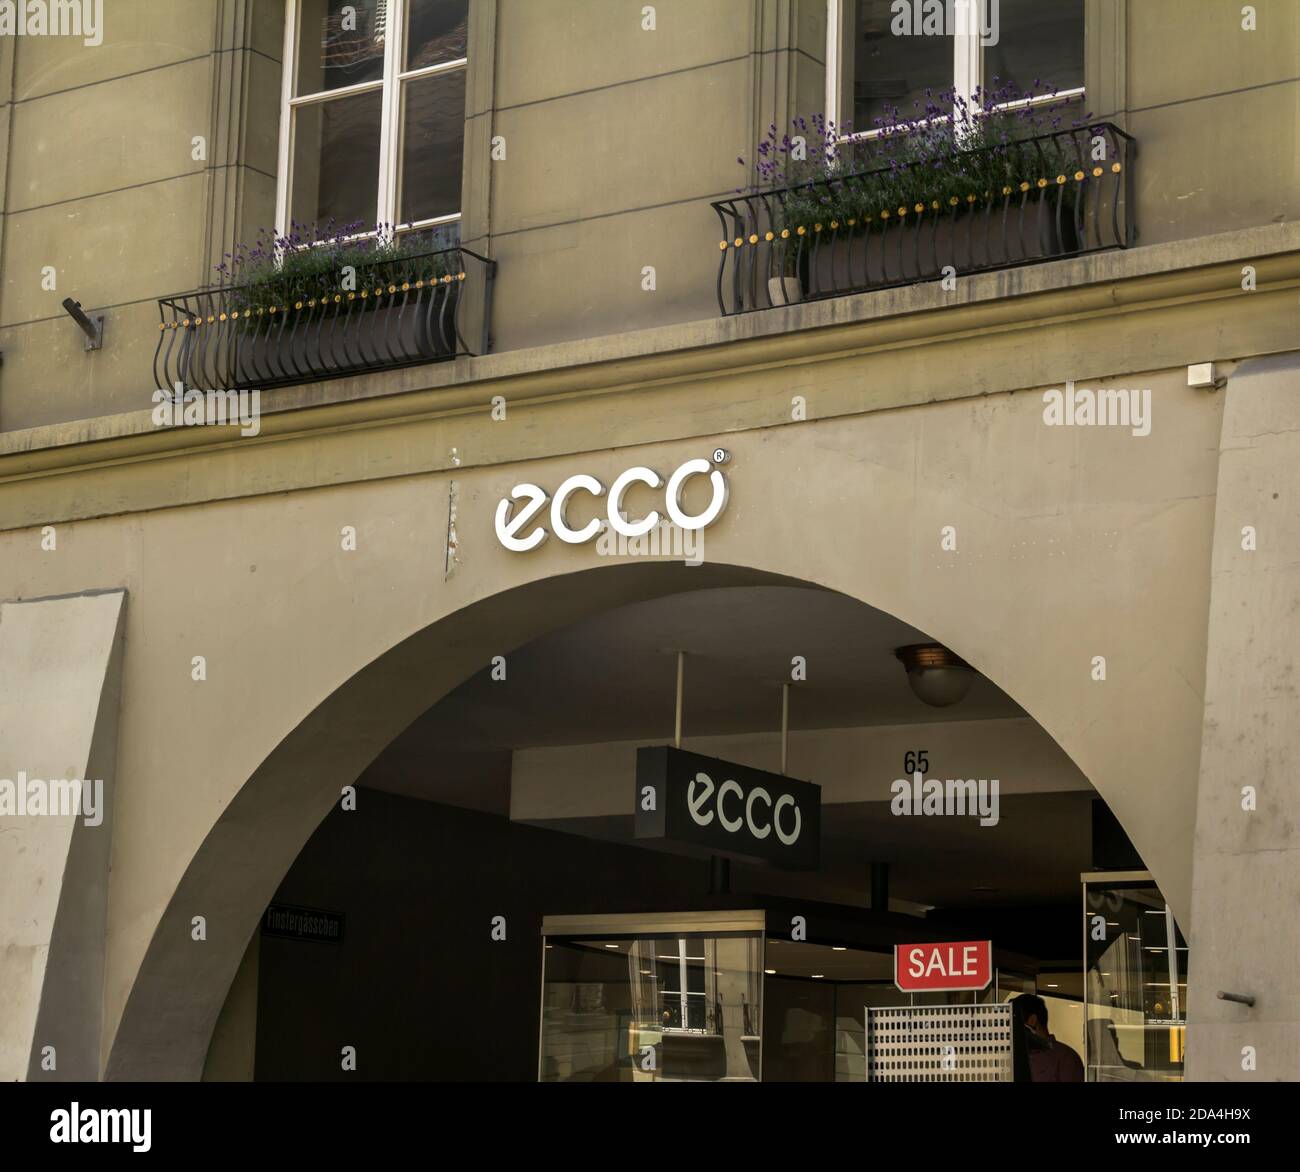 Ecco Logo High Resolution Stock Photography and Images - Alamy